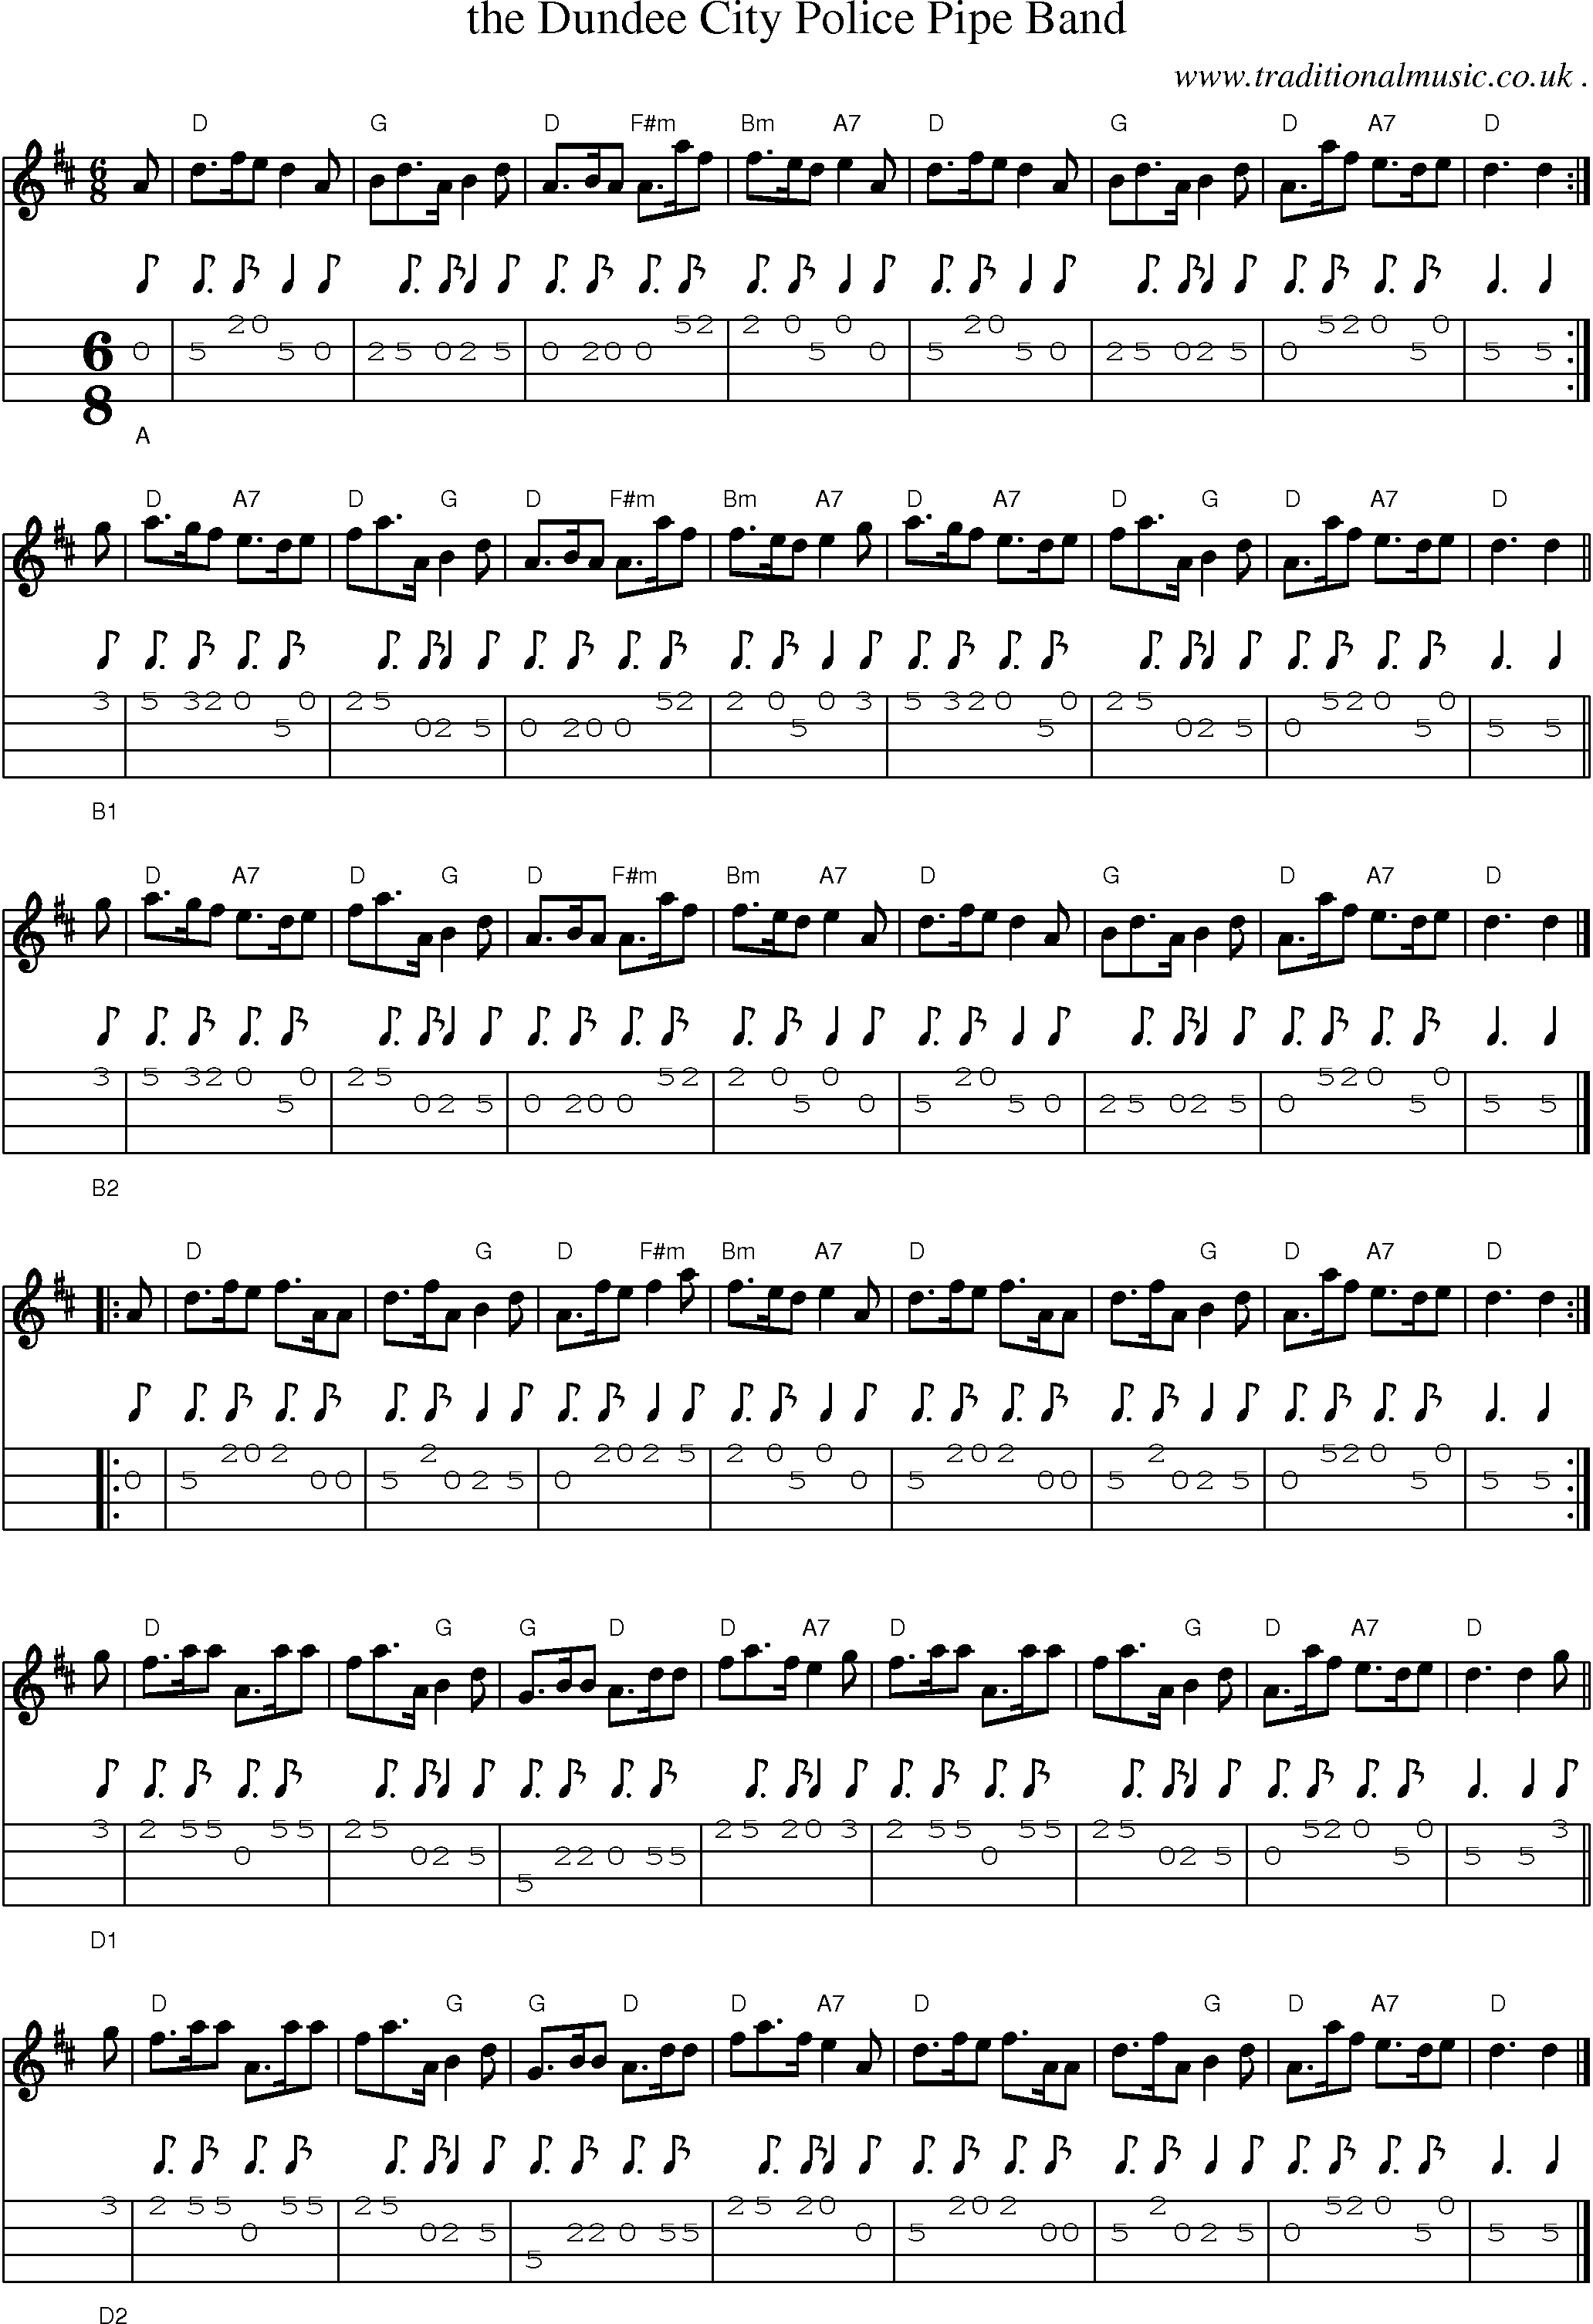 Sheet-music  score, Chords and Mandolin Tabs for The Dundee City Police Pipe Band